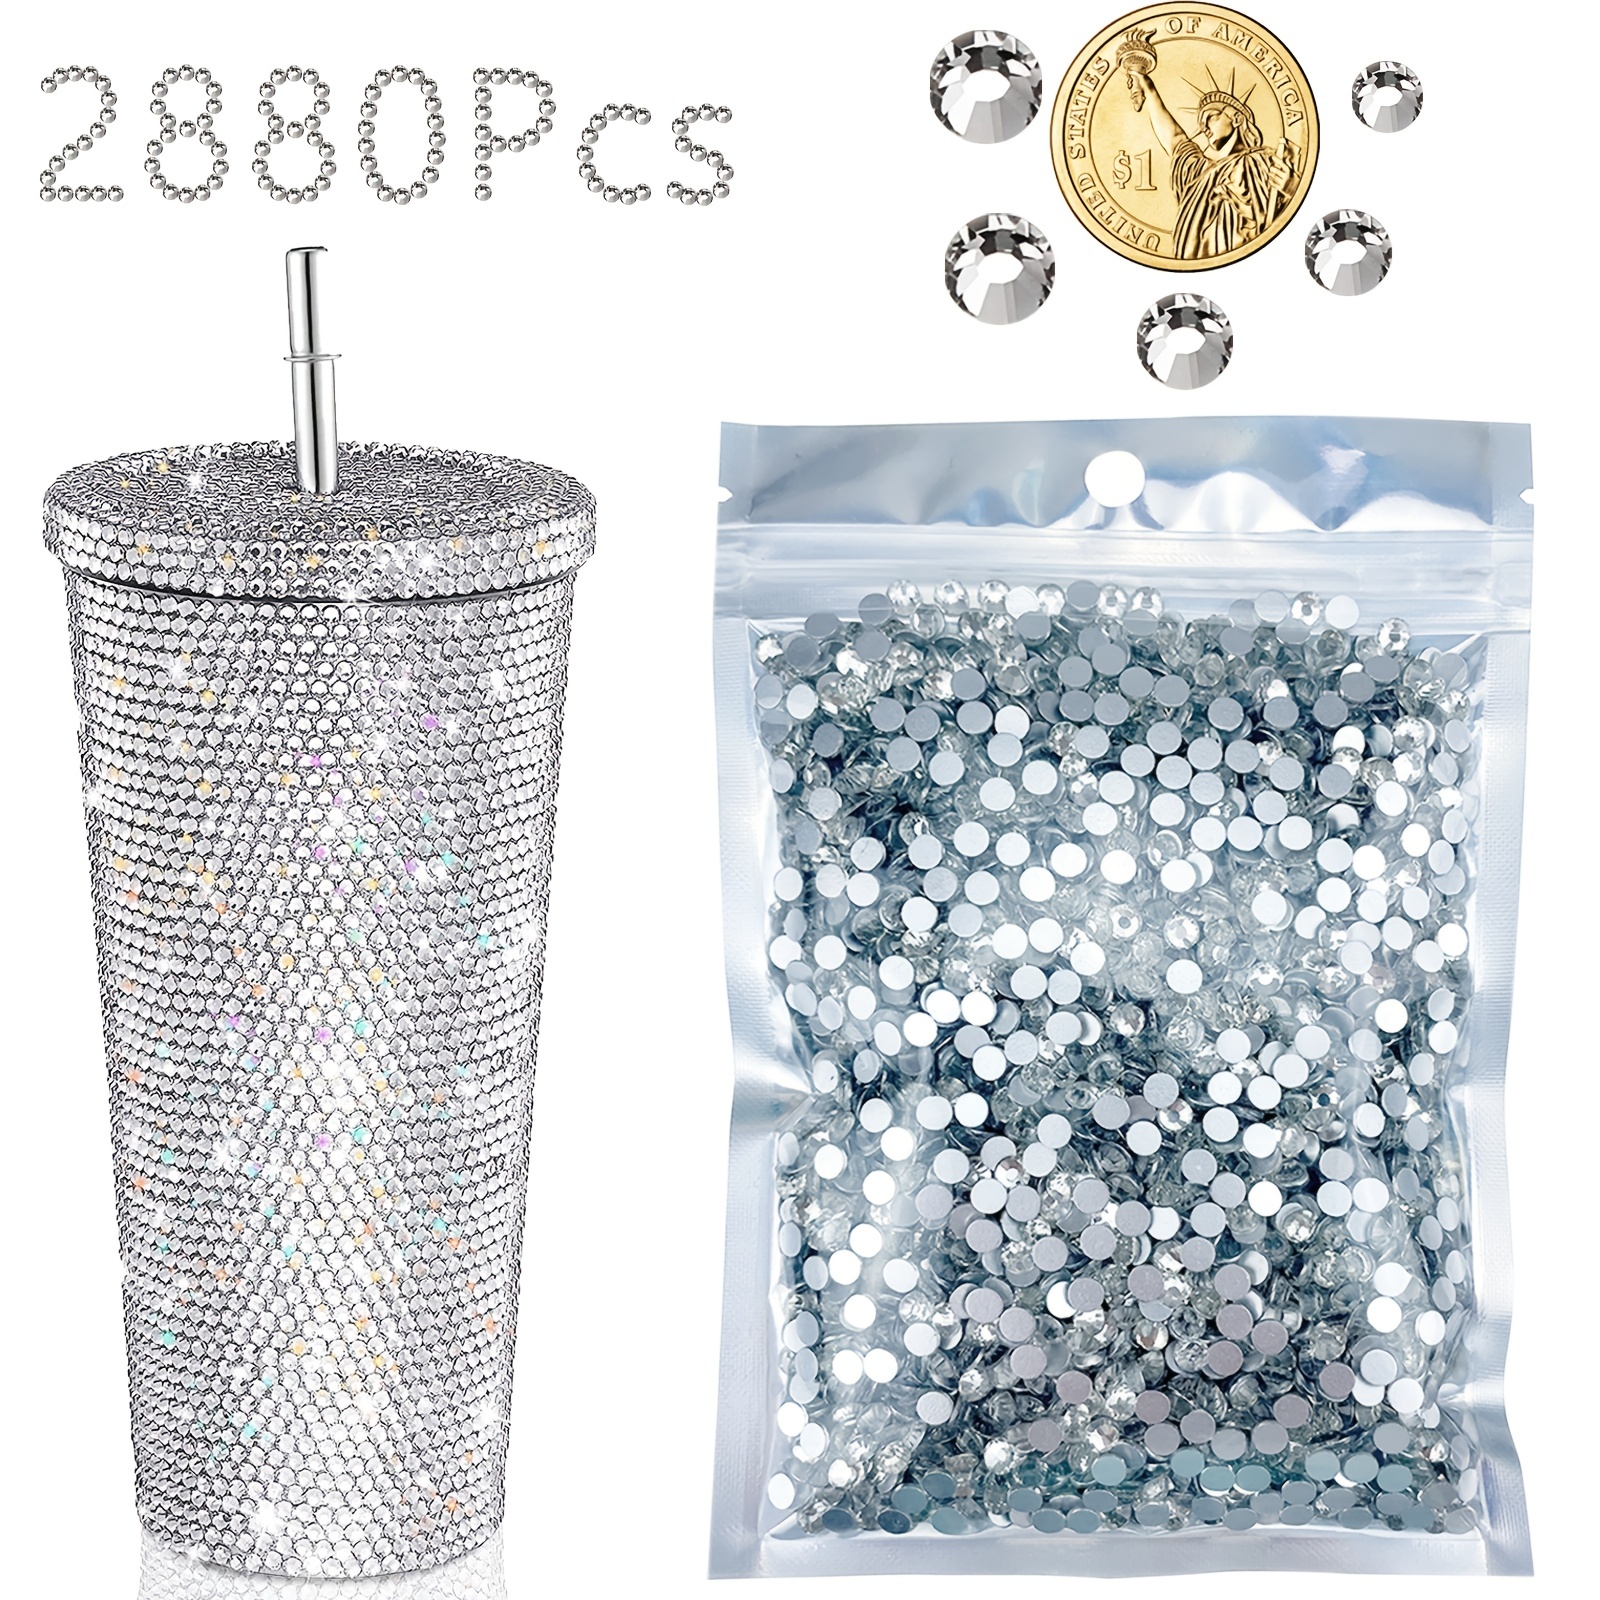 Bulk Rhinestones for Jewelry, Crafts and More –